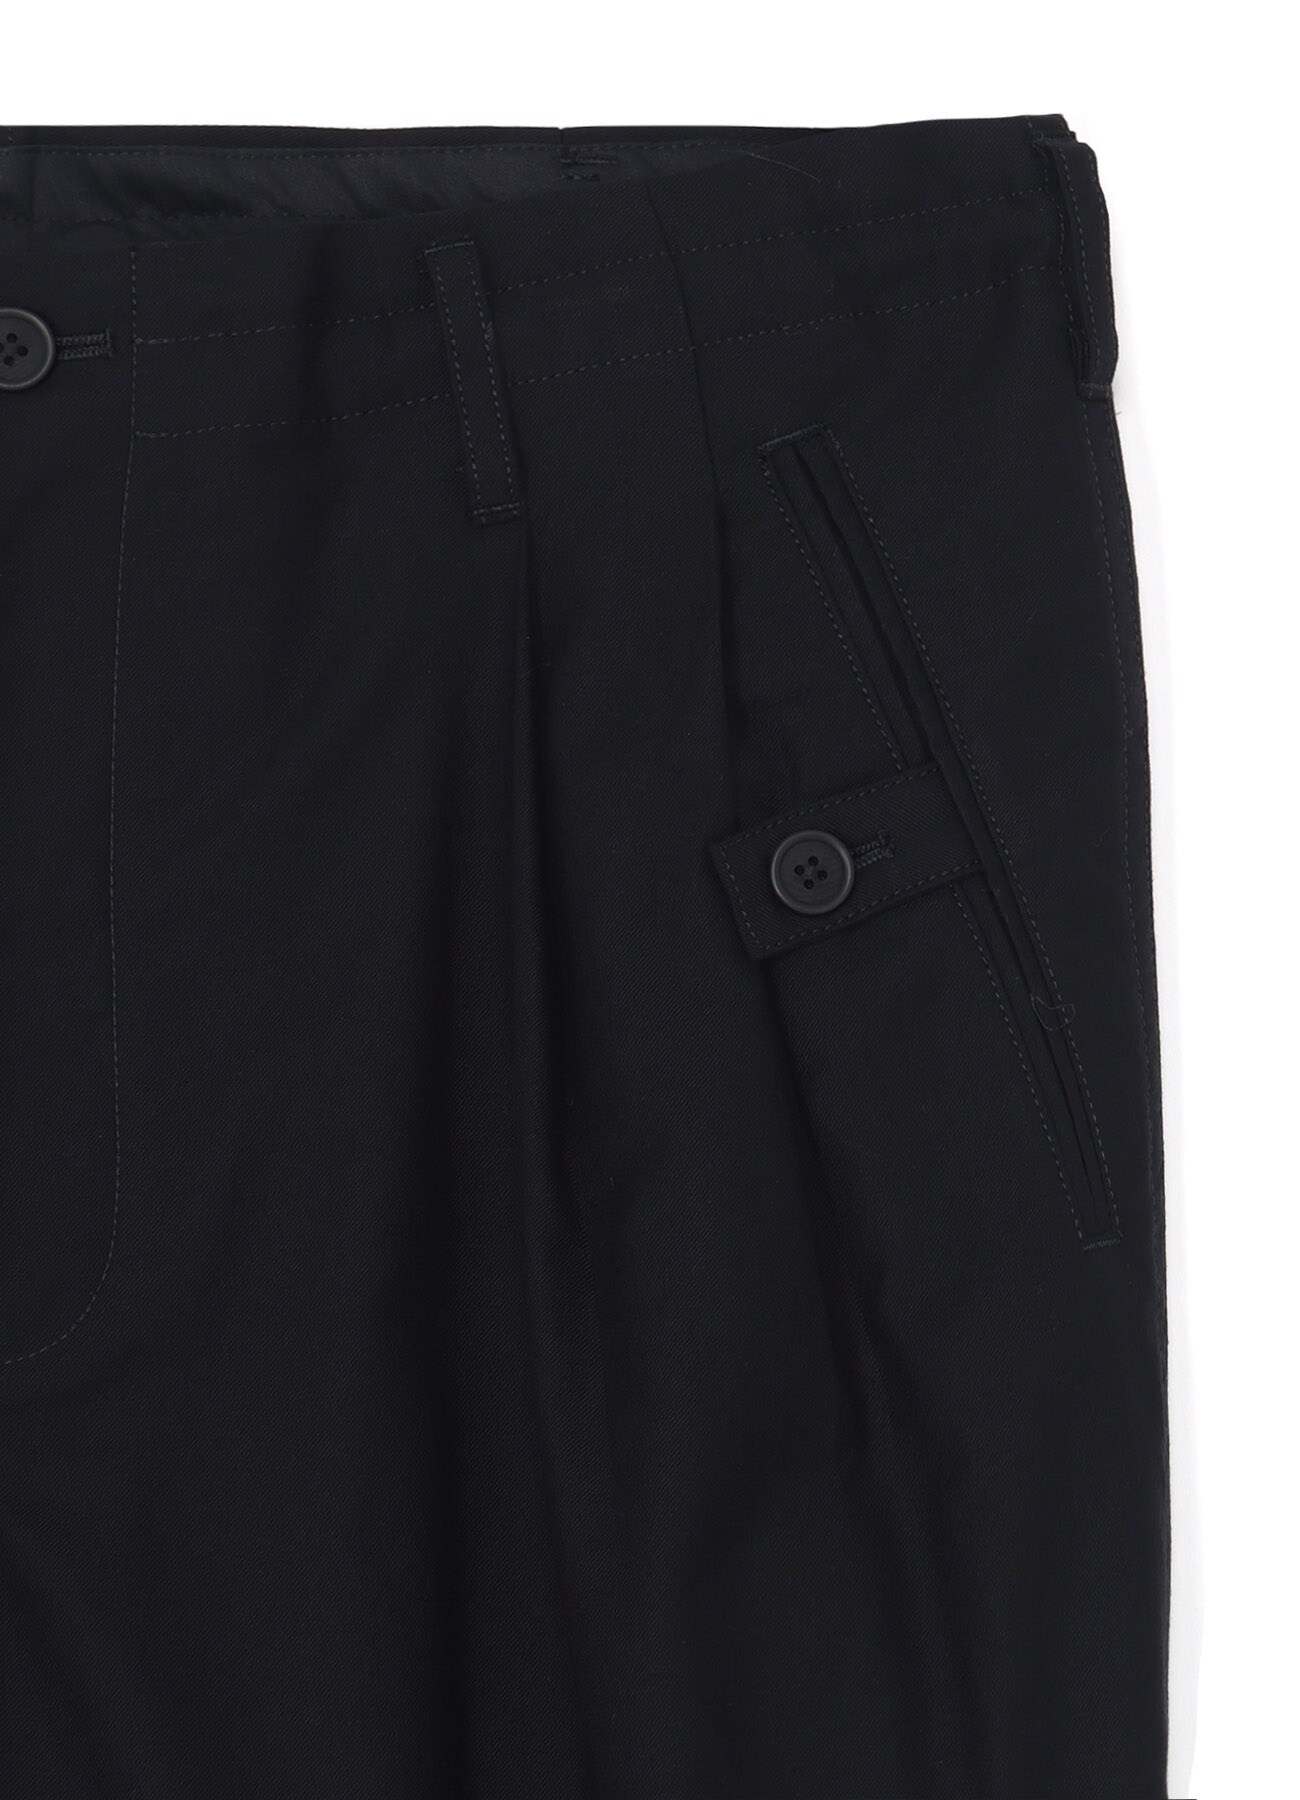 COTTON TWILL PANTS WITH TAB DETAILS